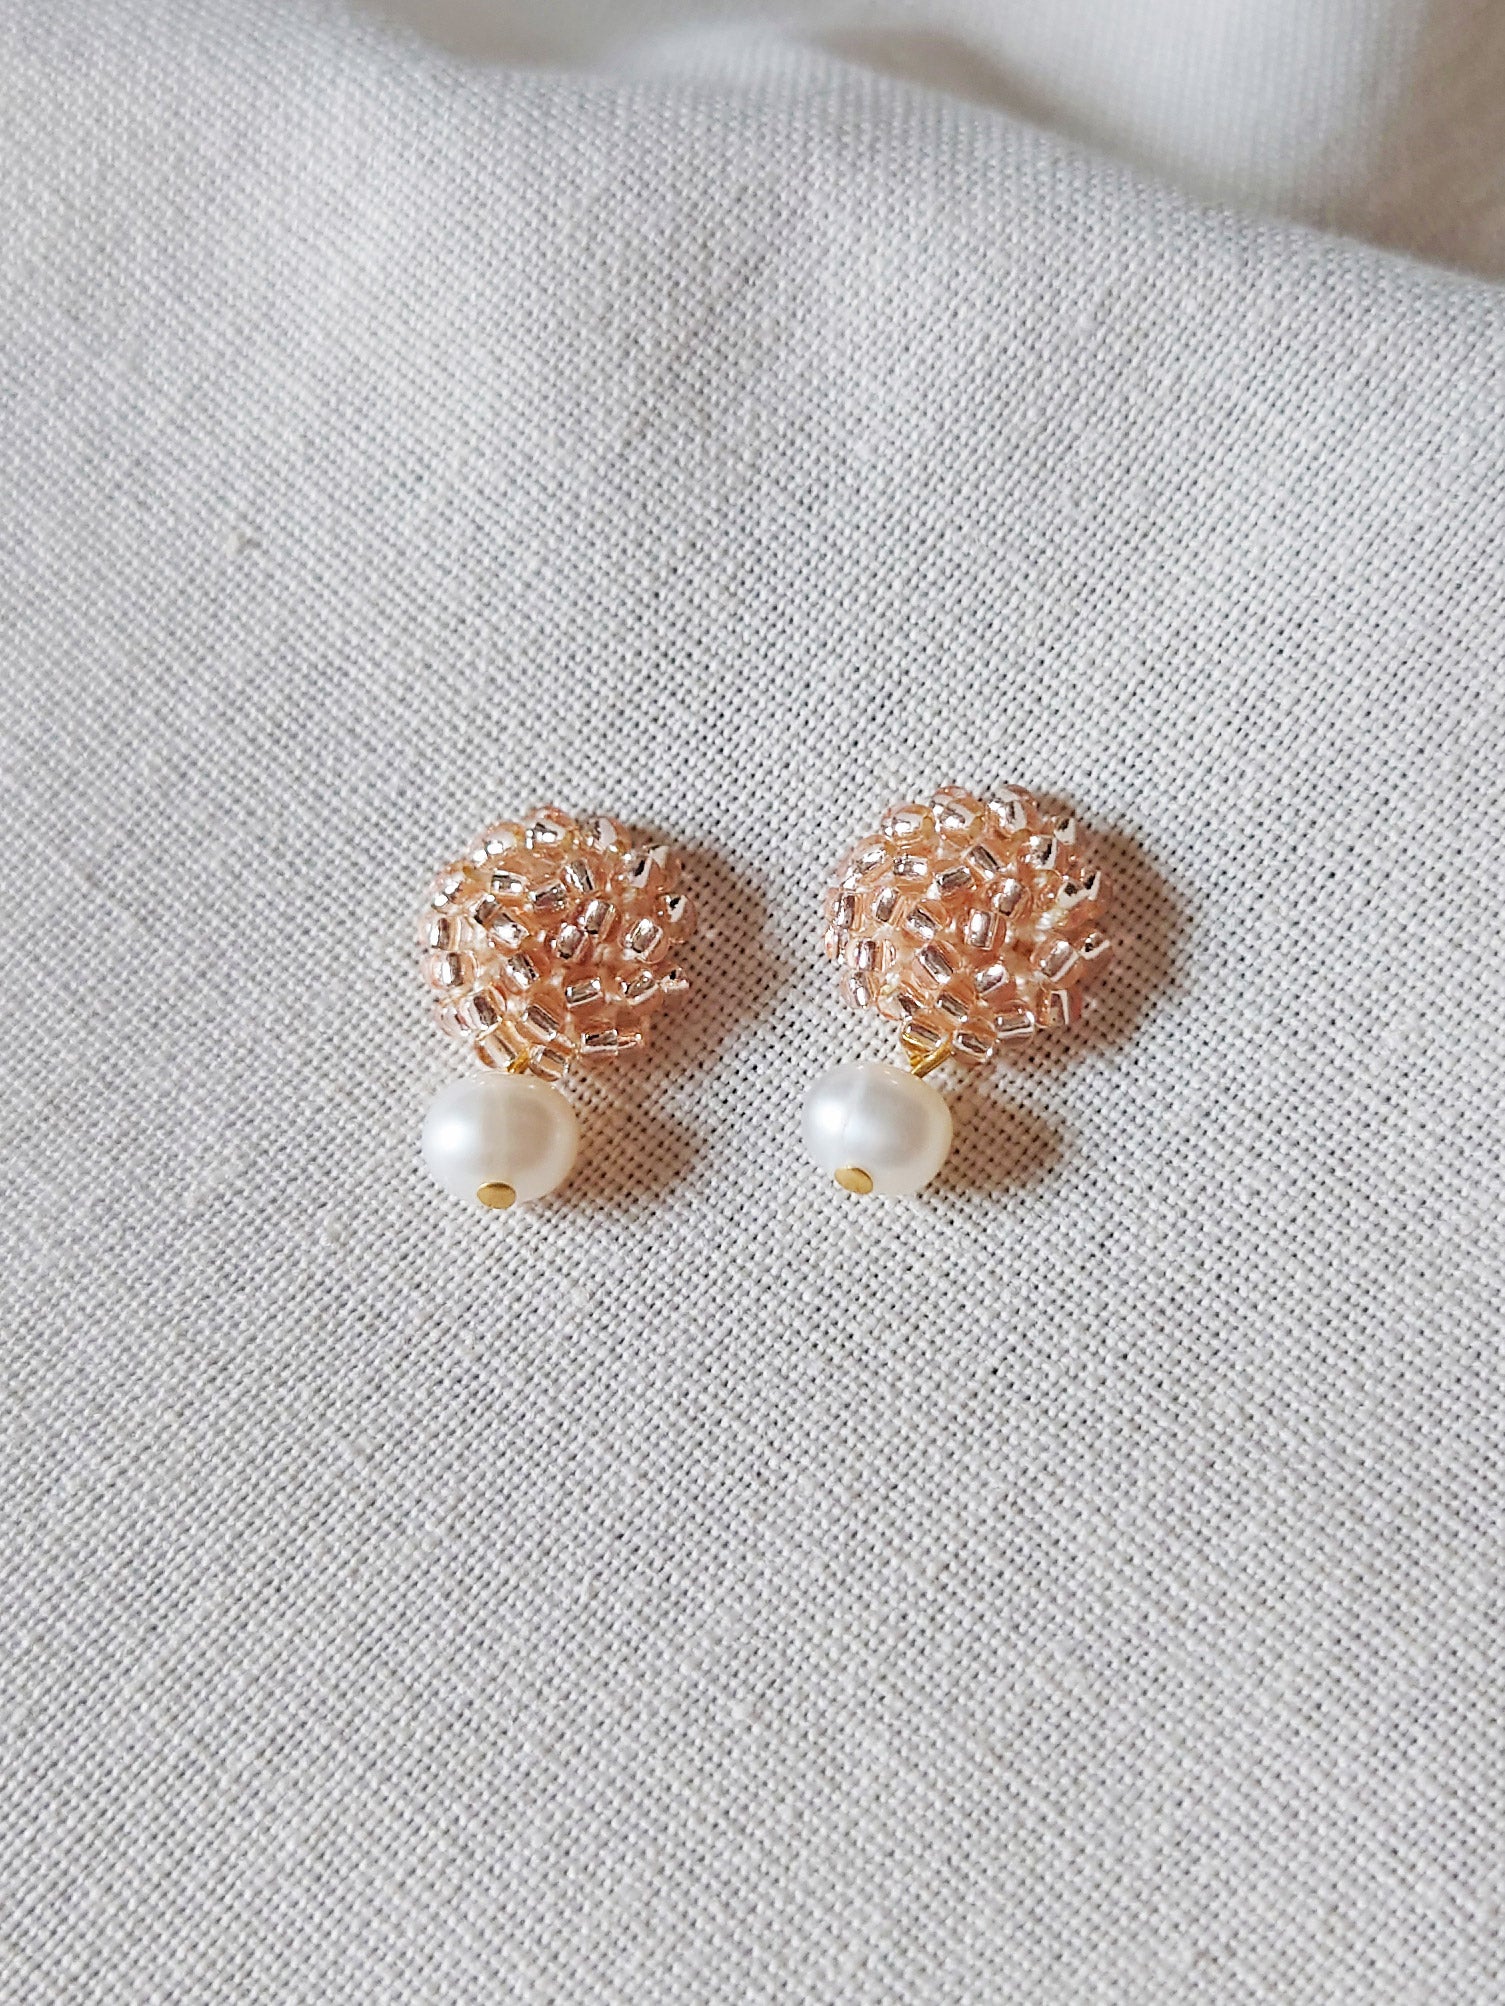 Phoebe Earrings in Champagne Pink Front